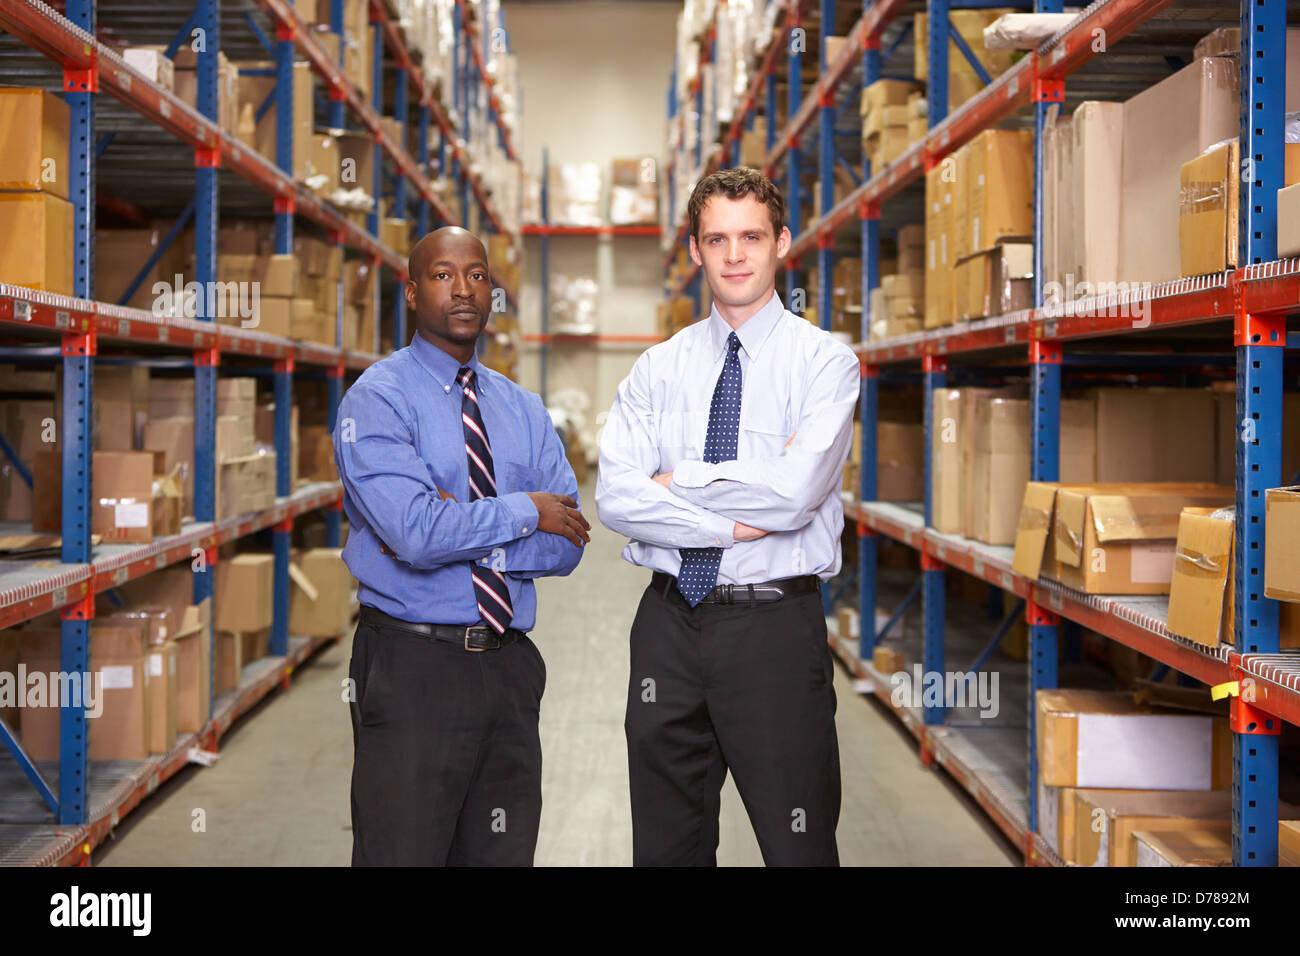 Portrait Of Two Businessmen In Warehouse Stock Photo